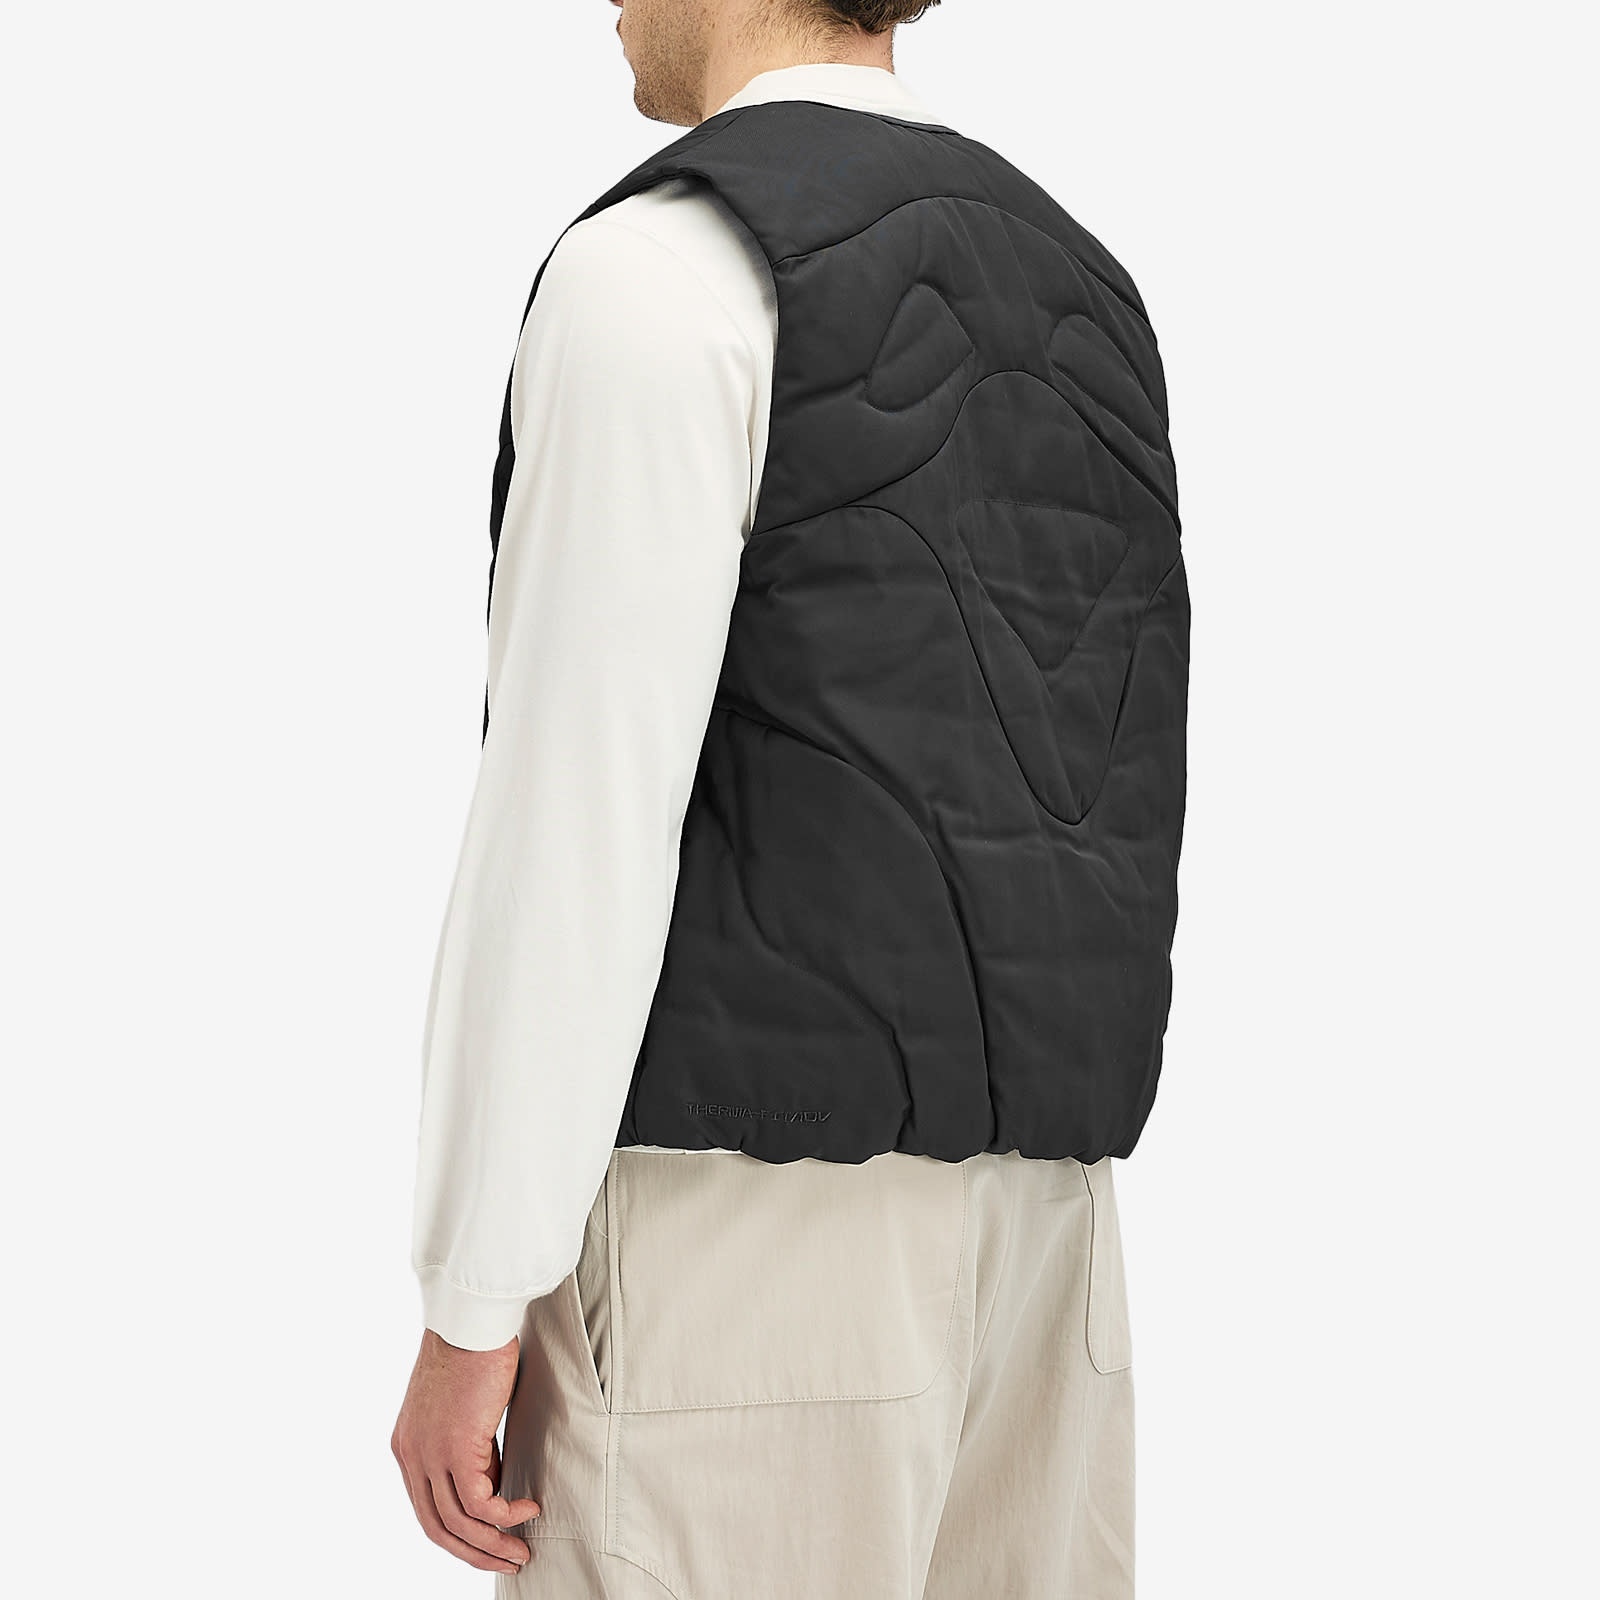 Nike Tech Pack Insulated Atlas Vest - 3